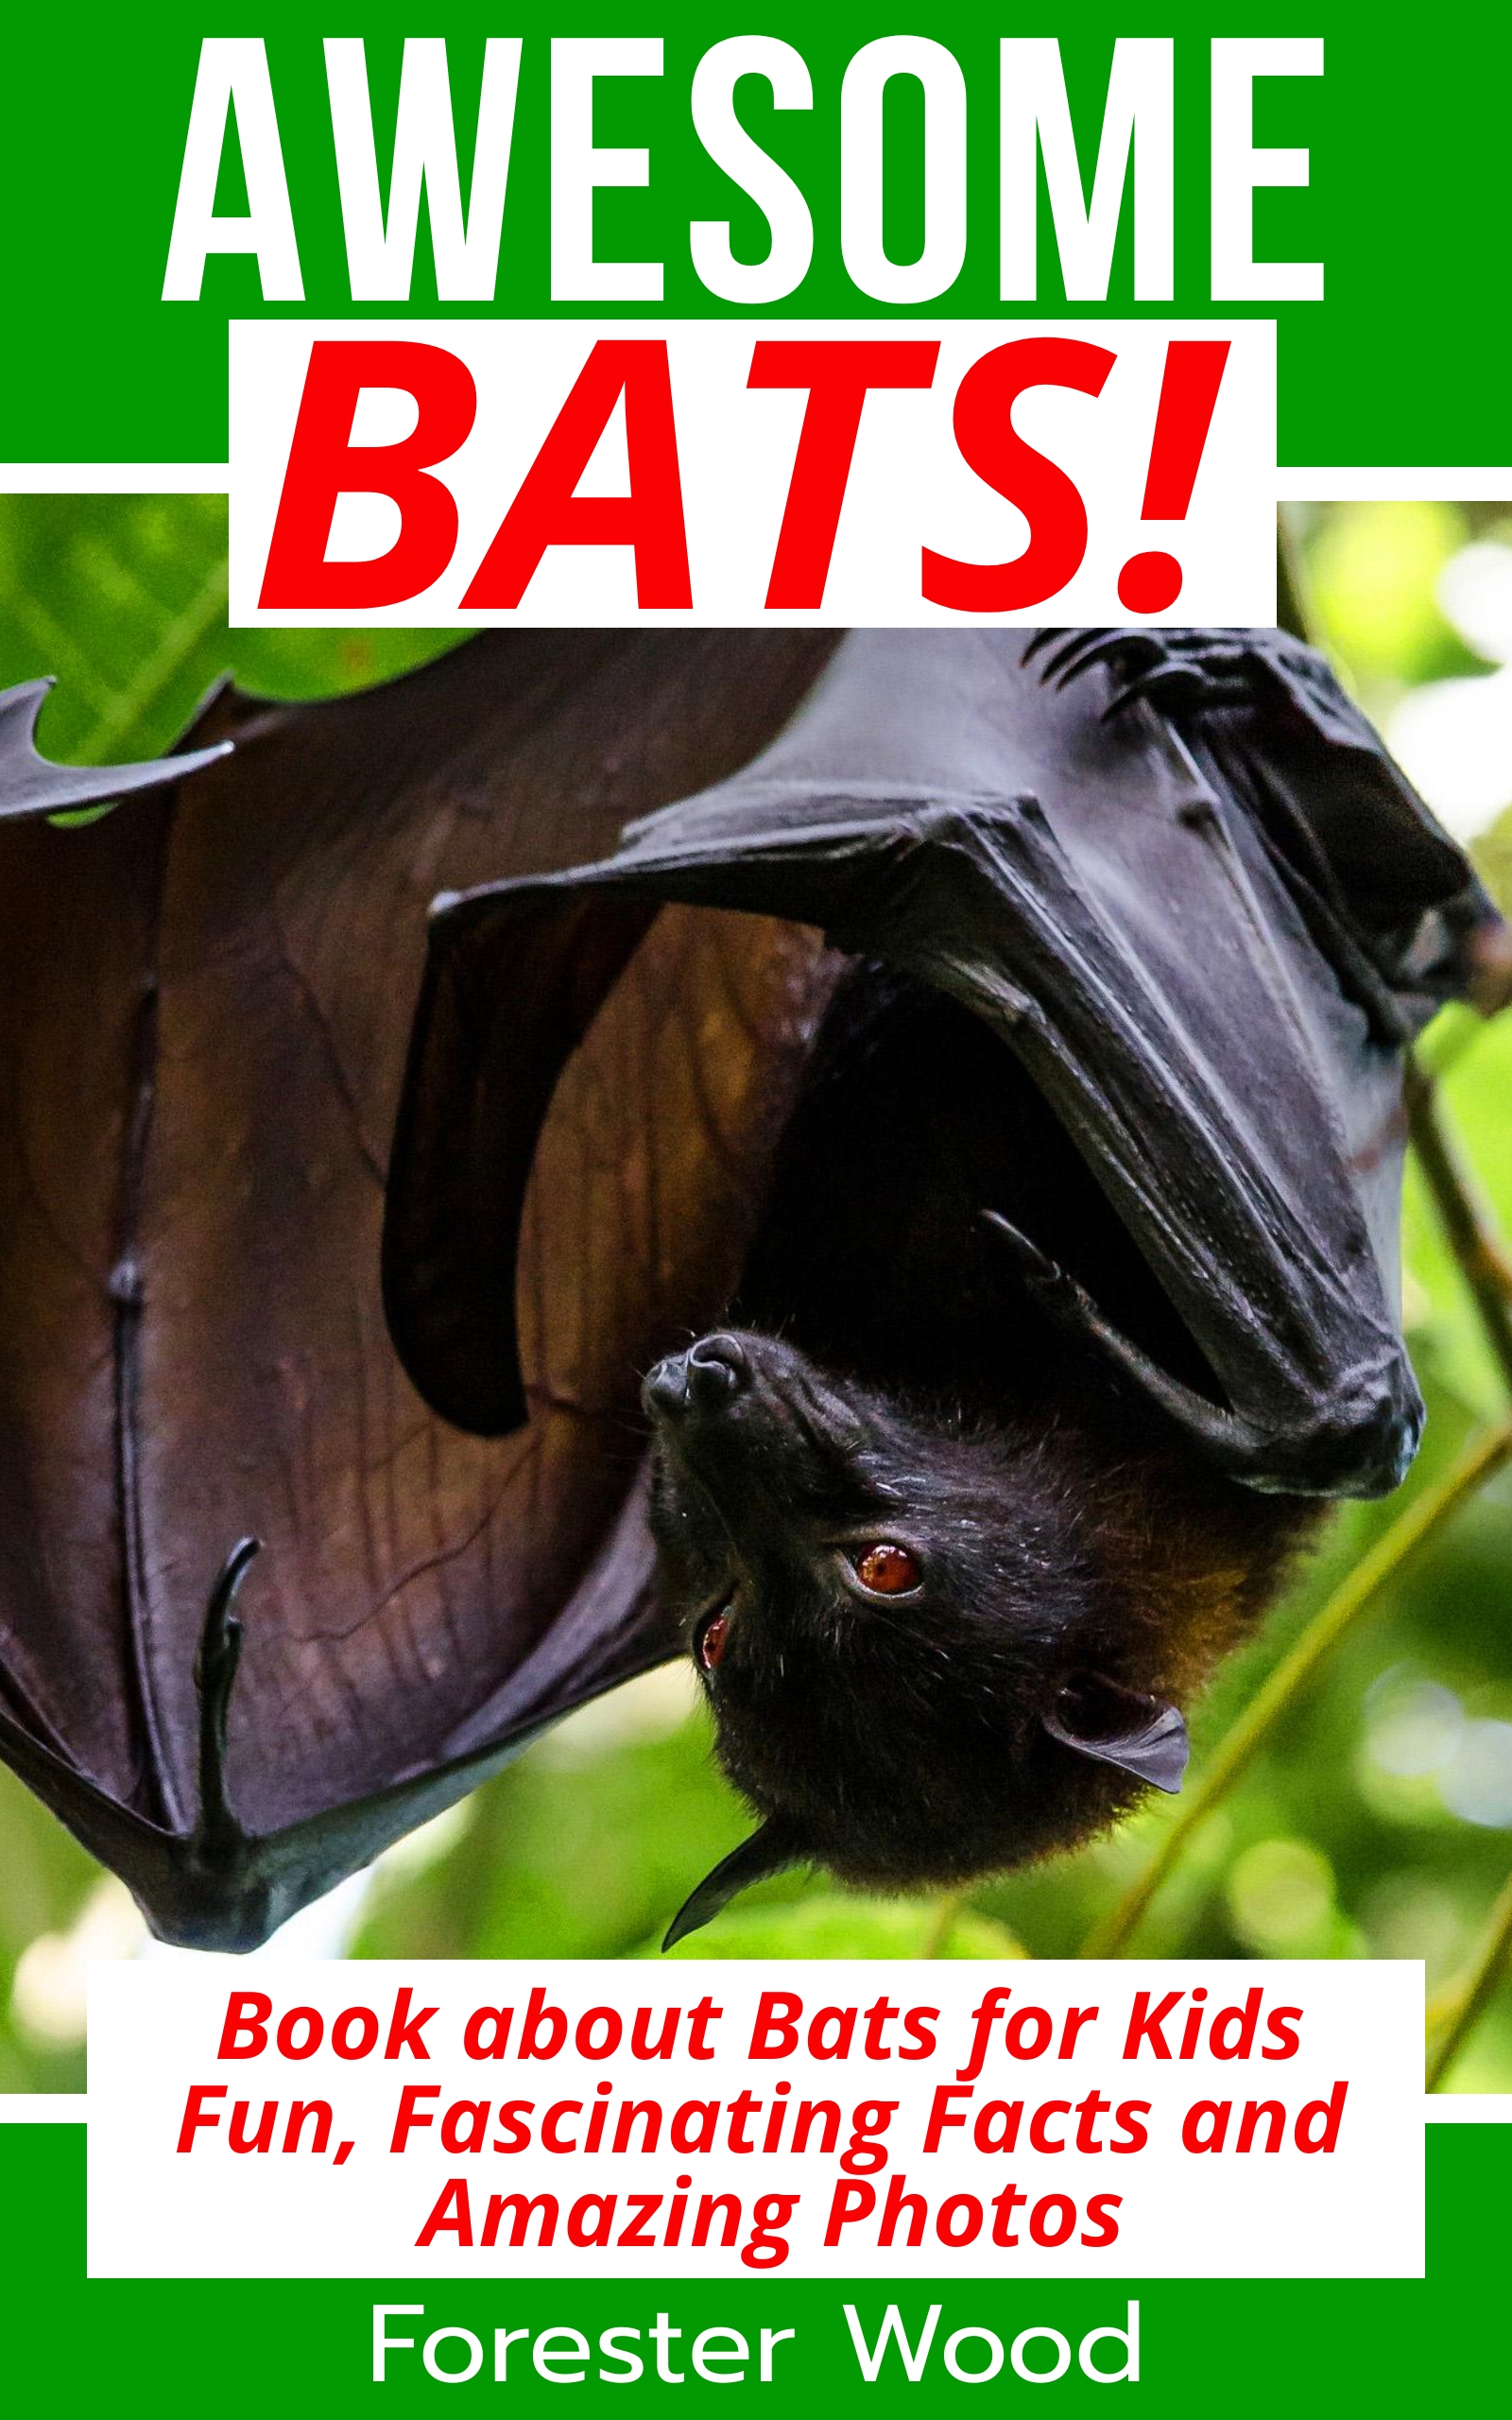 FREE: Awesome Bats by Forester Wood